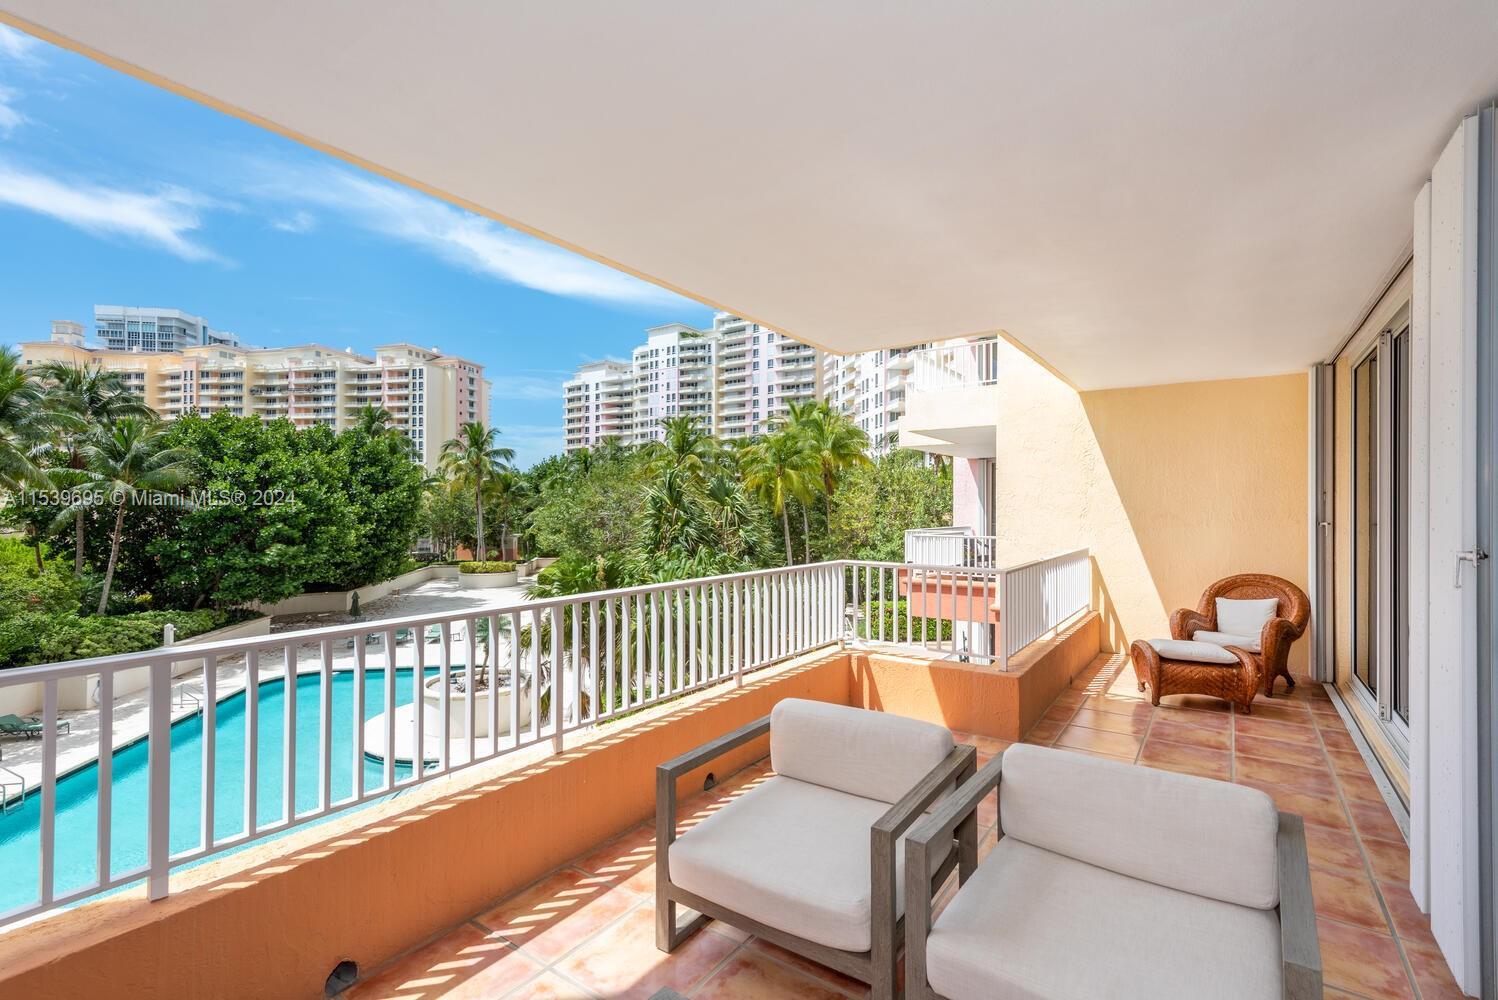 Enjoy this beautiful and elegant apartment located in one of the best condomiuns of Key Biscayne. Th